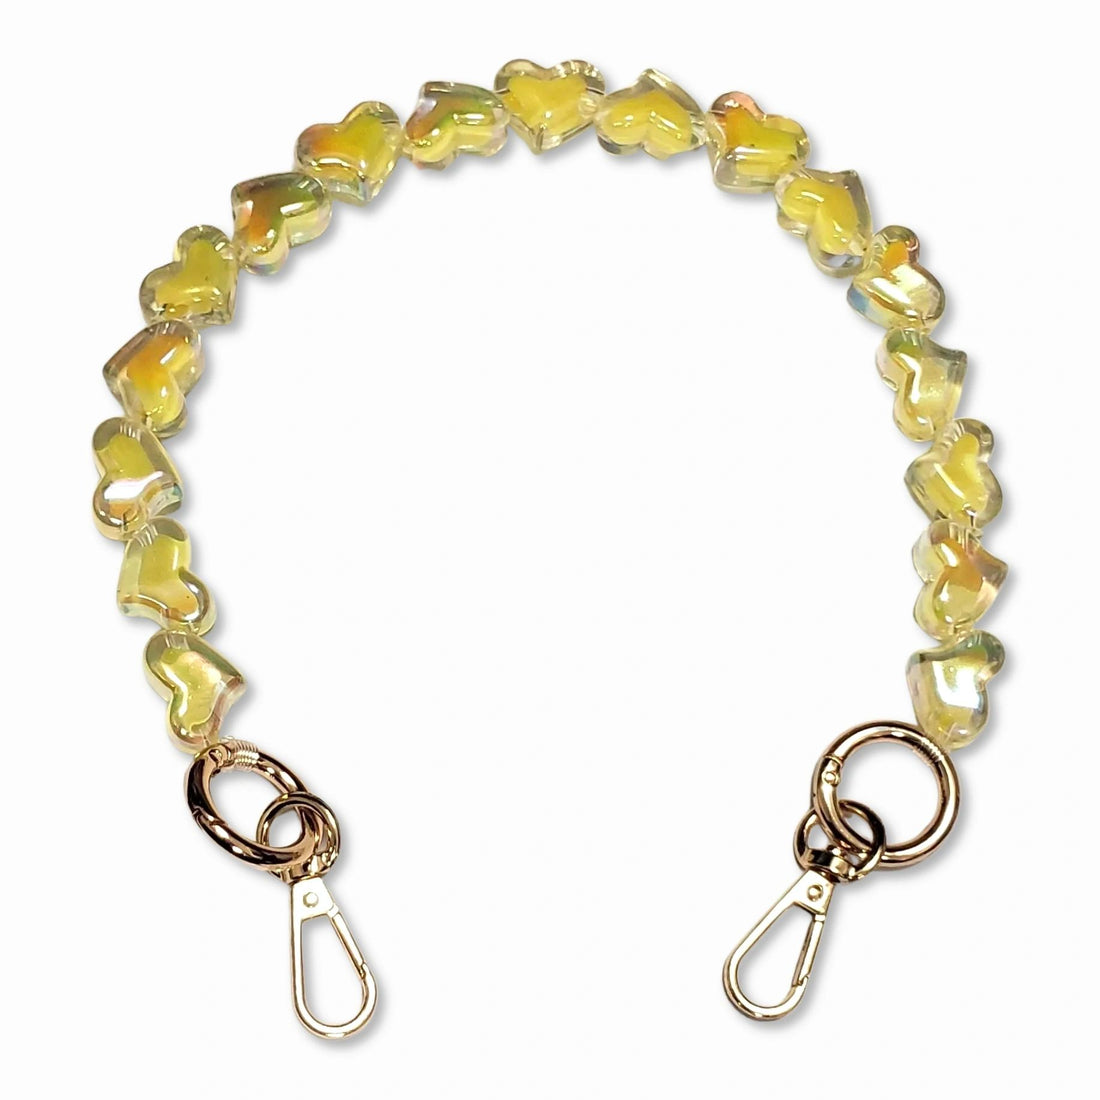 A short bead chain with golden carabiners and a glittery heart charm in yellow color. The chain is designed to be attached to a phone case and can be worn around the wrist for a playful and eye-catching look. The chain is made by The American Case and is designed to be durable.